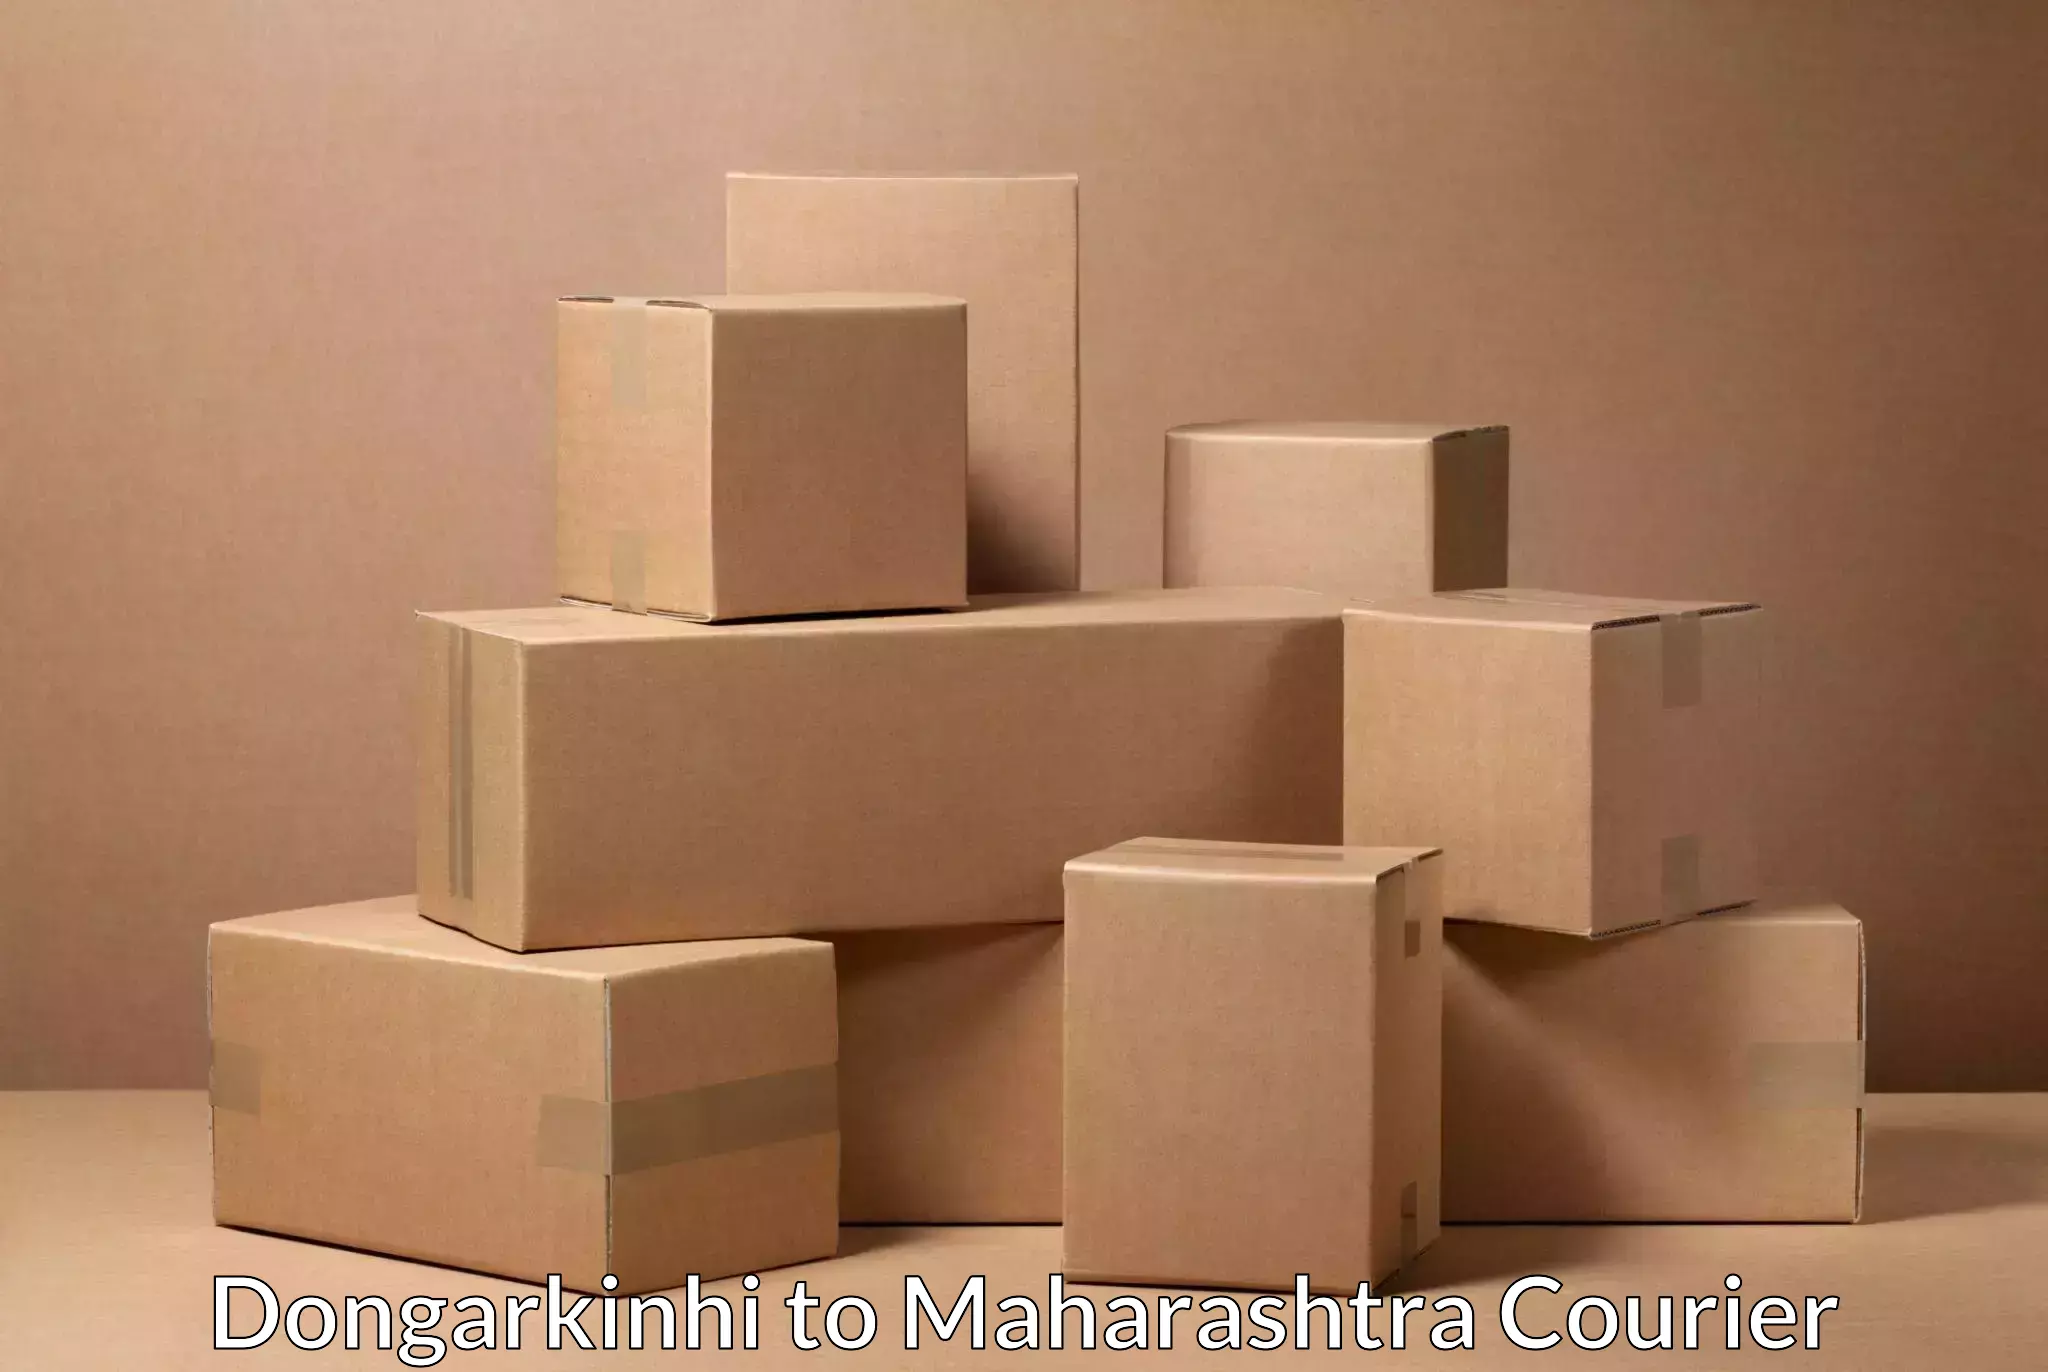 Large-scale shipping solutions in Dongarkinhi to Maharashtra